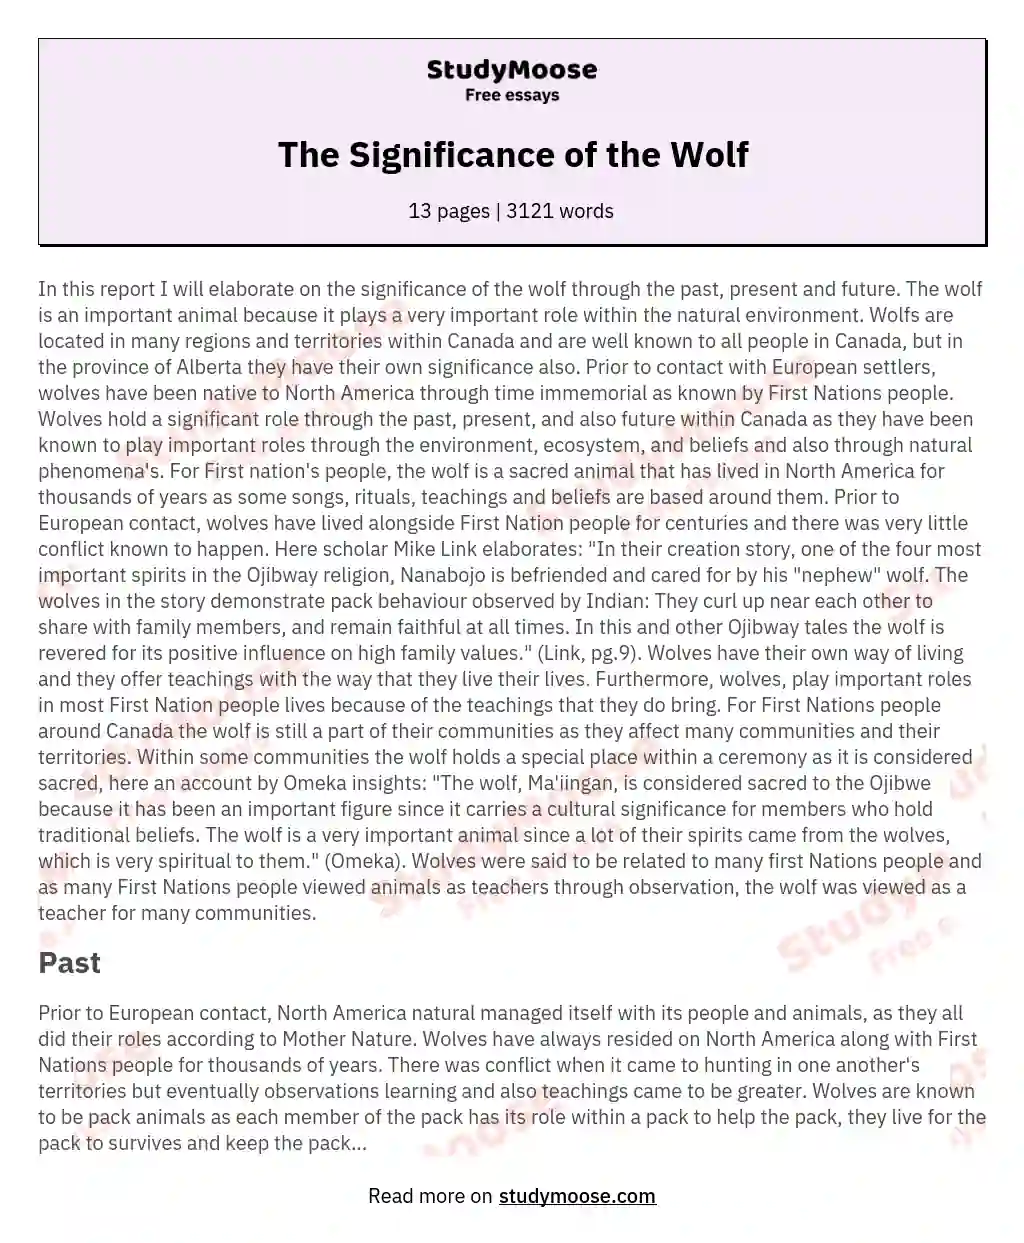 The Significance of the Wolf